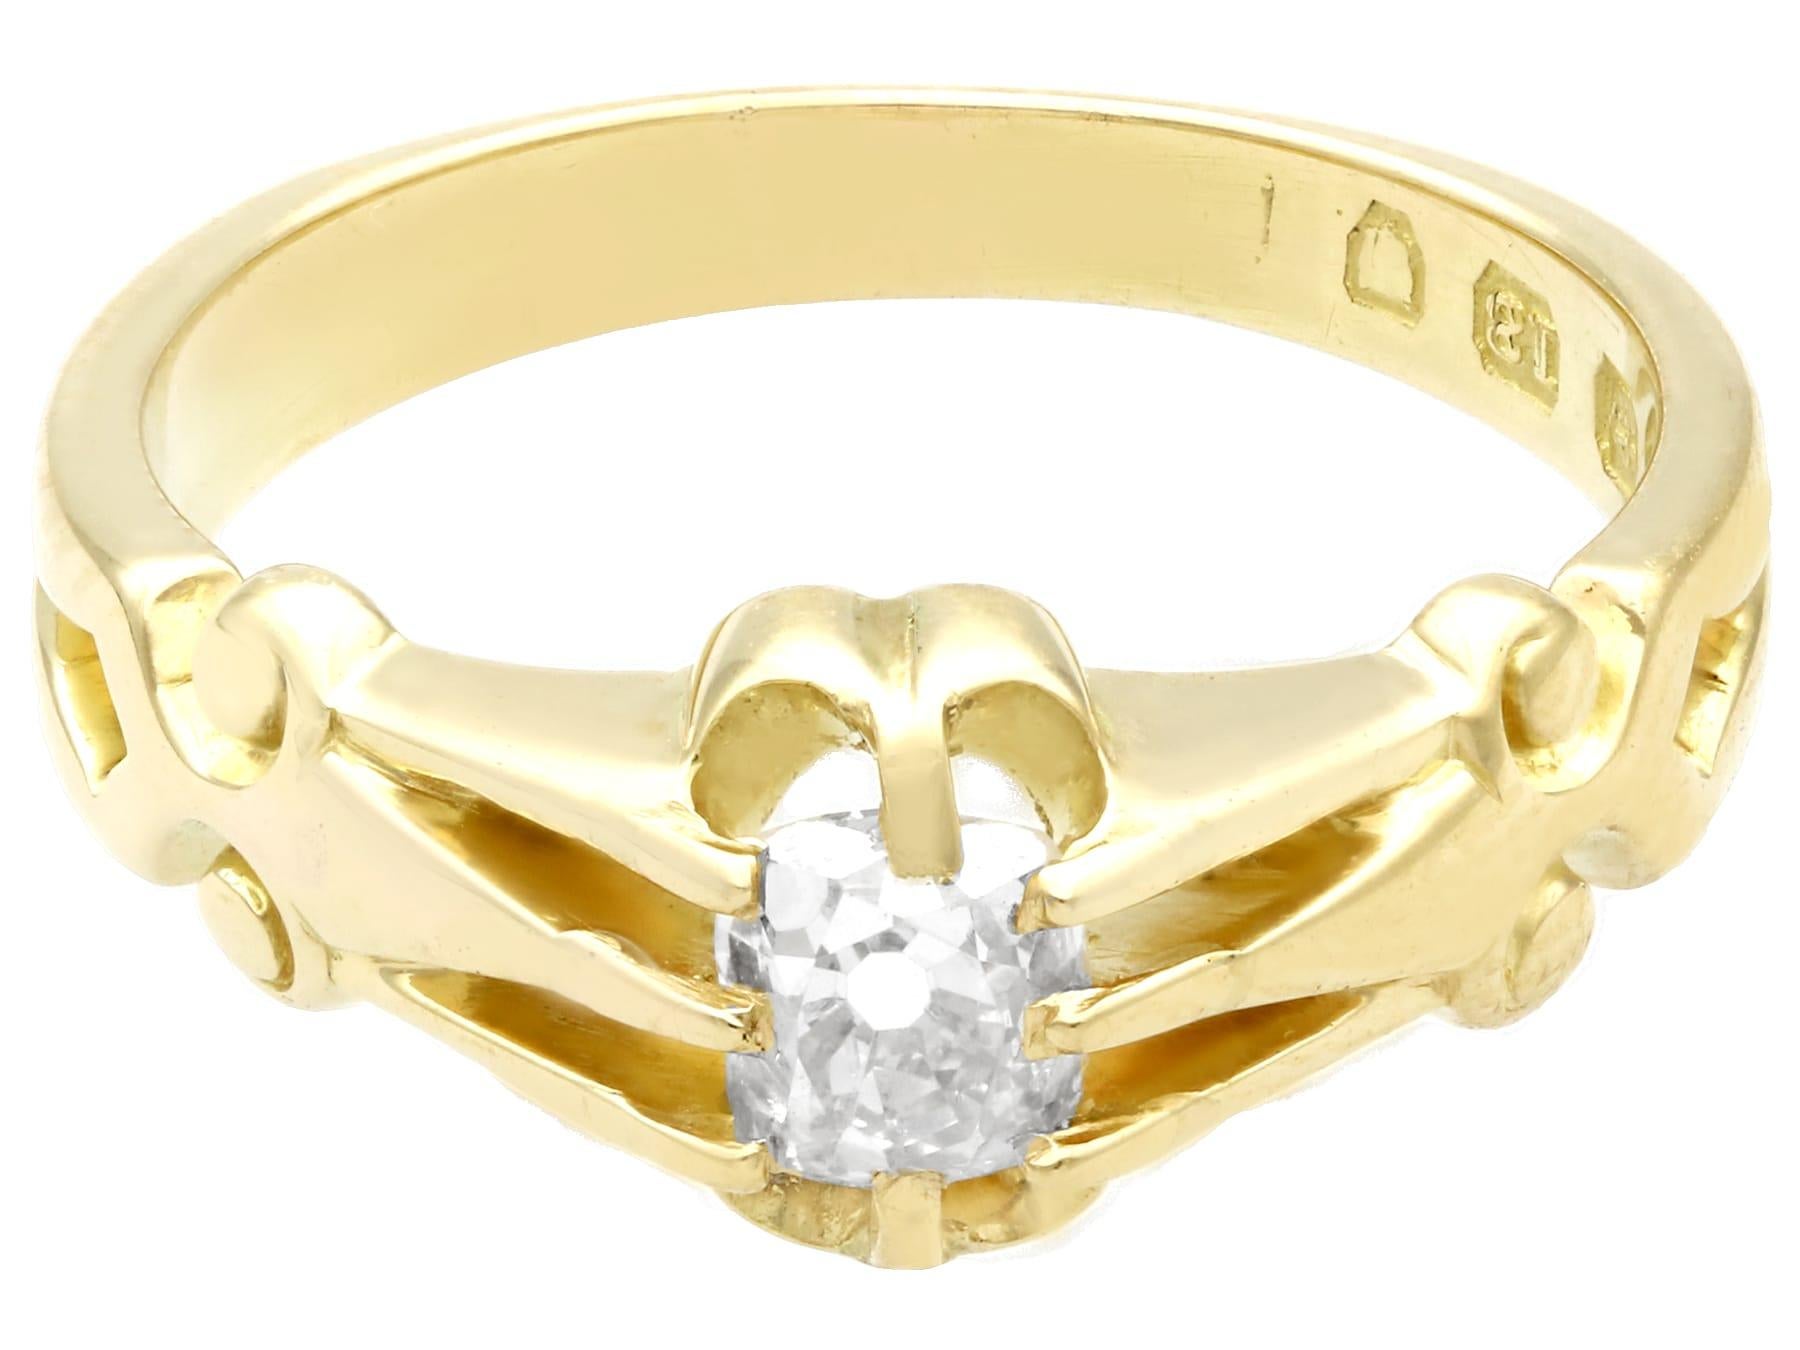 Antique Diamond and 18K Yellow Gold Solitaire Ring In Excellent Condition For Sale In Jesmond, Newcastle Upon Tyne